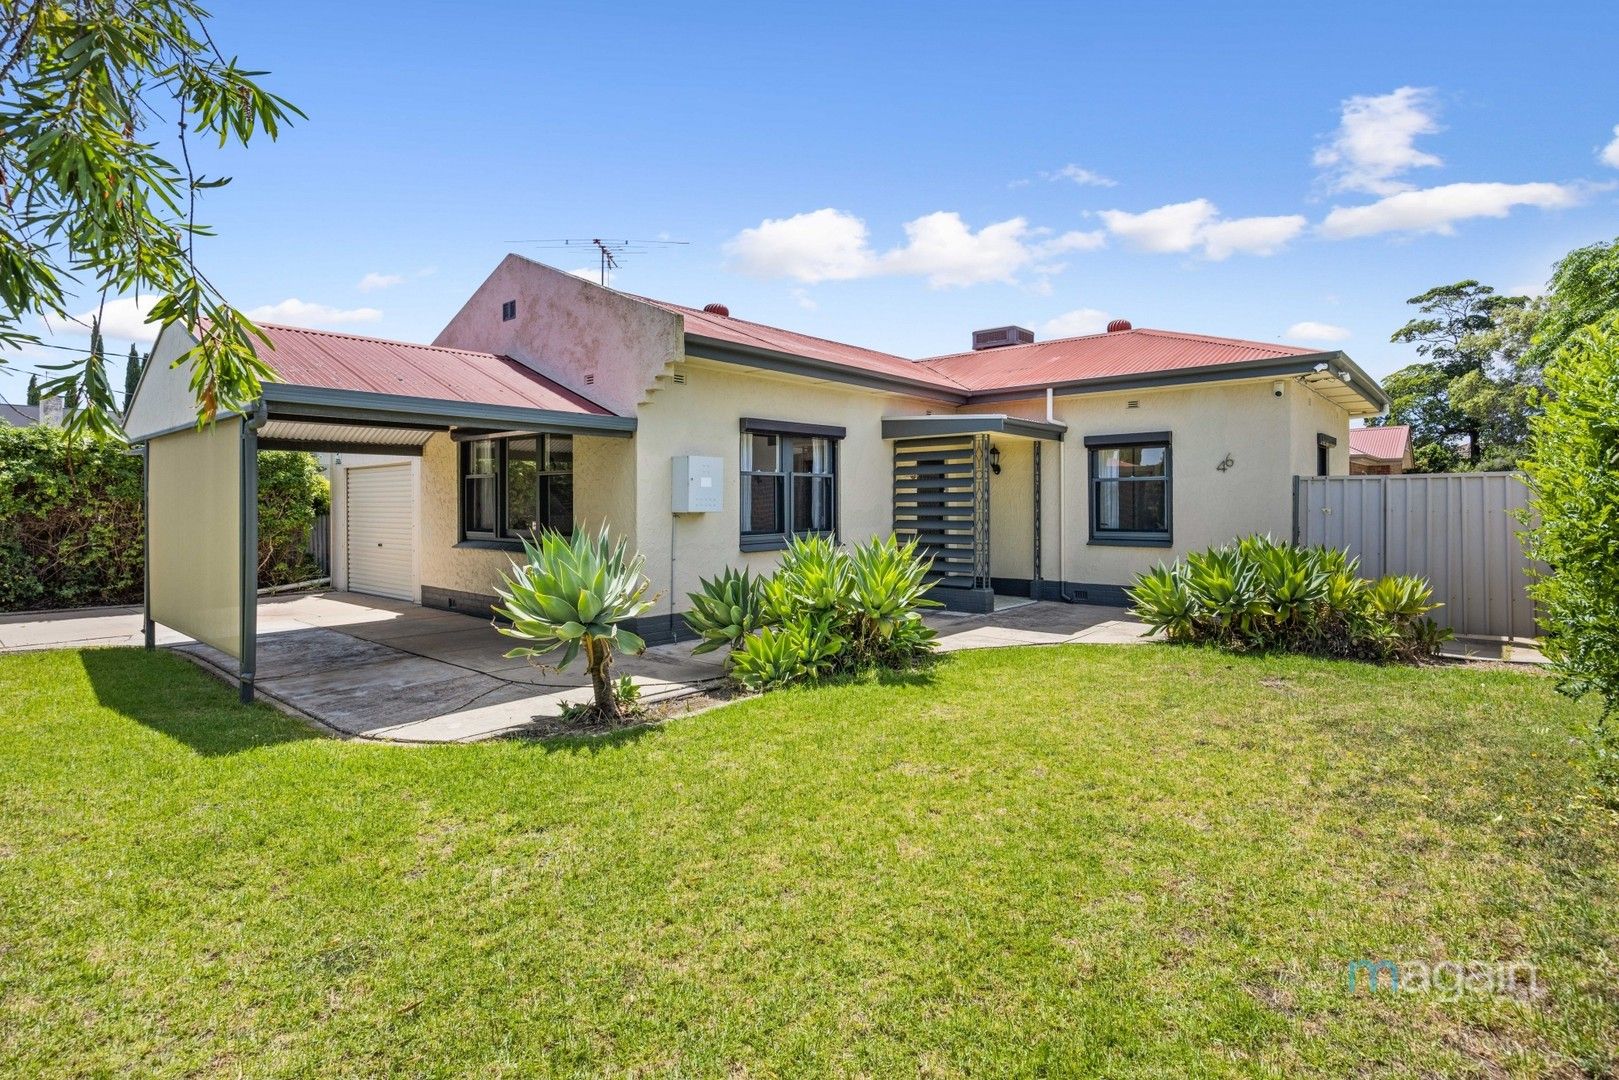 2 bedrooms House in 46 Adelaide Terrace ASCOT PARK SA, 5043